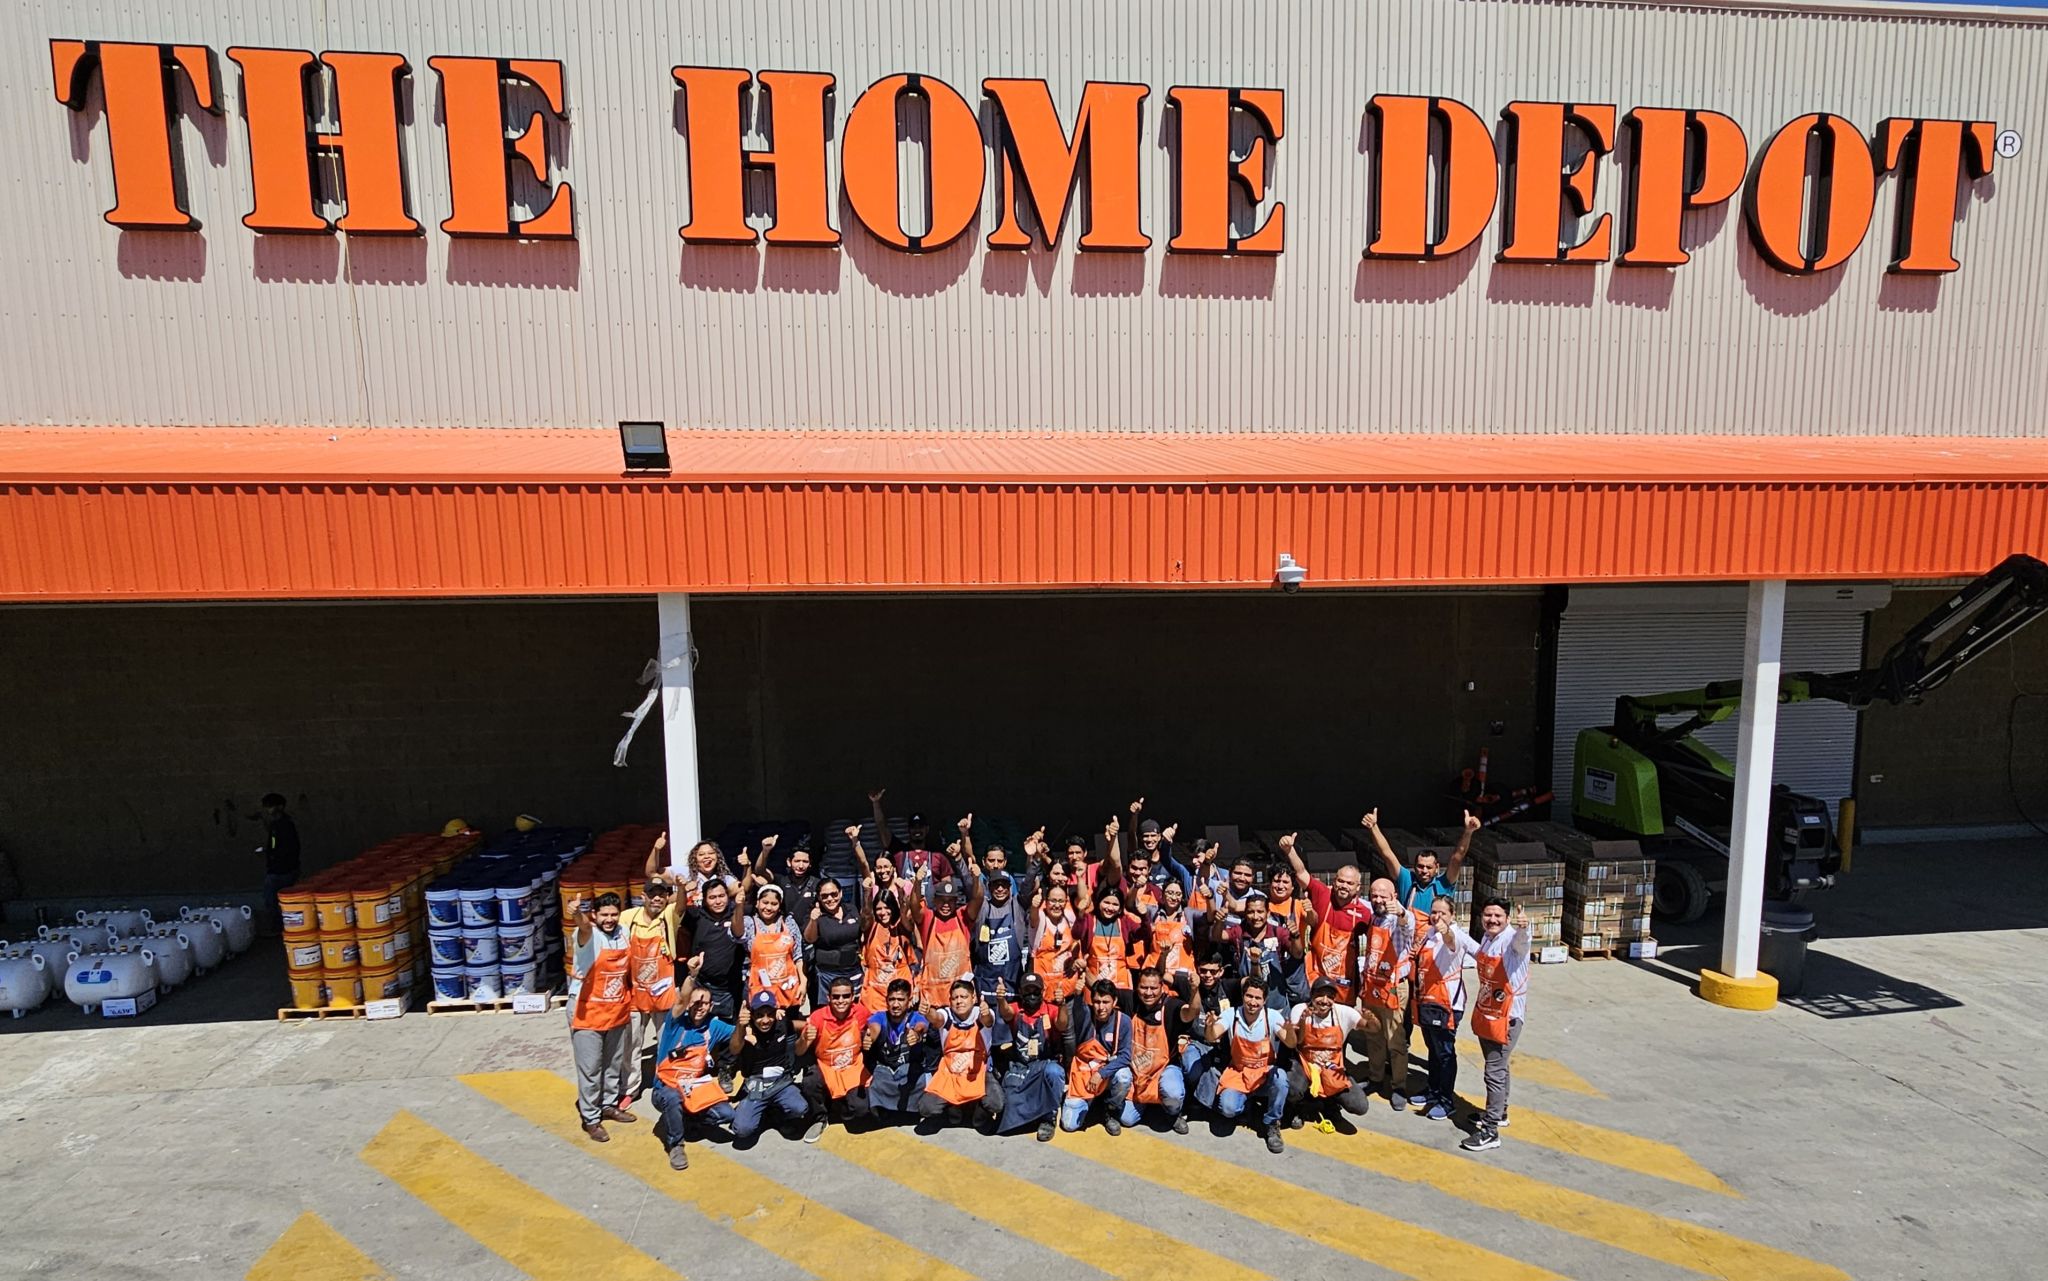 The Home Depot in Acapulco, Mexico